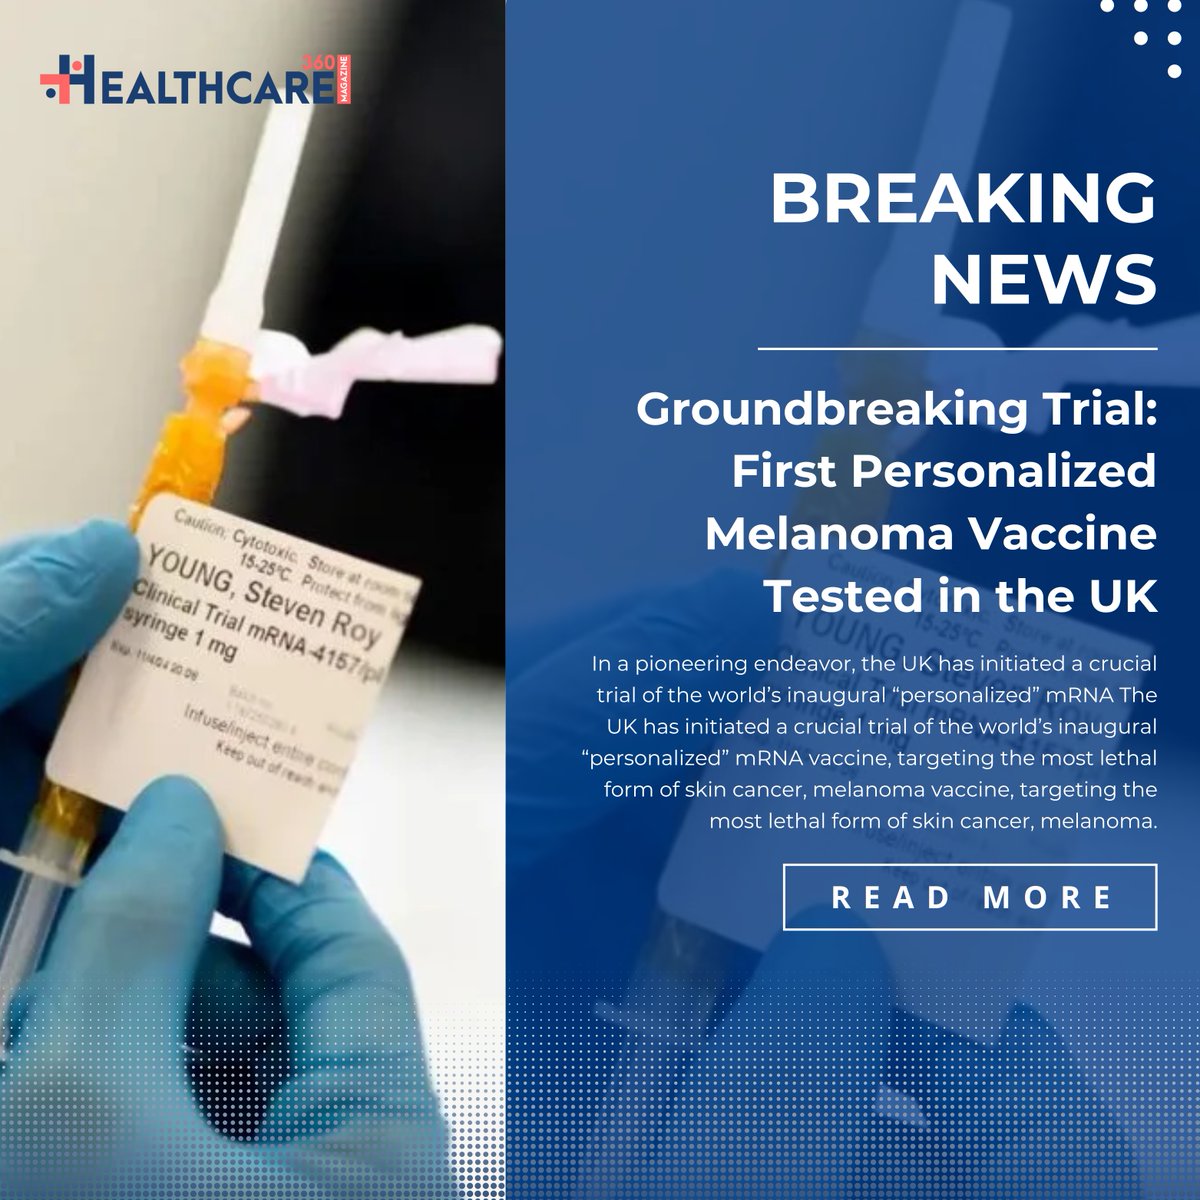 Pioneering personalized melanoma vaccine trial underway in the UK! Join us as we embrace groundbreaking science to combat skin cancer.

Read More: healthcare360magazine.com/first-personal…

#MelanomaVaccine #PersonalizedMedicine #CancerResearch #HealthcareInnovation #ScienceBreakthrough